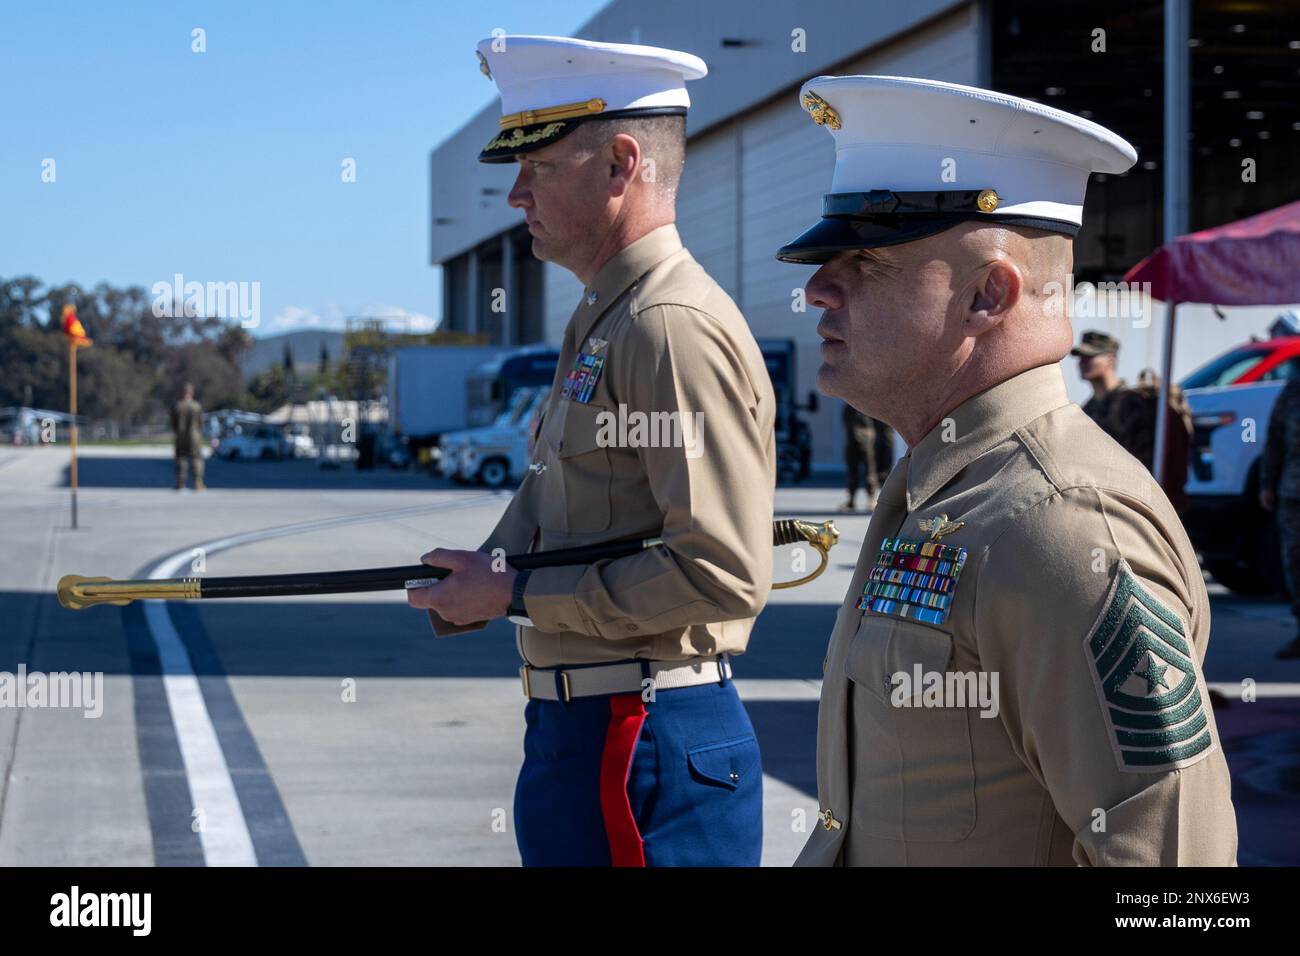 U.S. Marine Corps Lt. Col. Stephen Borrett, left, the commanding officer for Headquarters and Headquarters Squadron, Marine Corps Air Station Camp Pendleton, and Sgt. Maj. David Gonzalez, the outgoing sergeant major for H&HS, MCAS Camp Pendleton, stand at attention during a relief and appointment ceremony on MCAS Camp Pendleton, California, Feb. 15, 2023. After two years of serving his role as sergeant major for H&HS, MCAS Camp Pendleton, Gonzalez relinquished his duties to Sgt. Maj. Robert Catching, the incoming sergeant major. Stock Photo